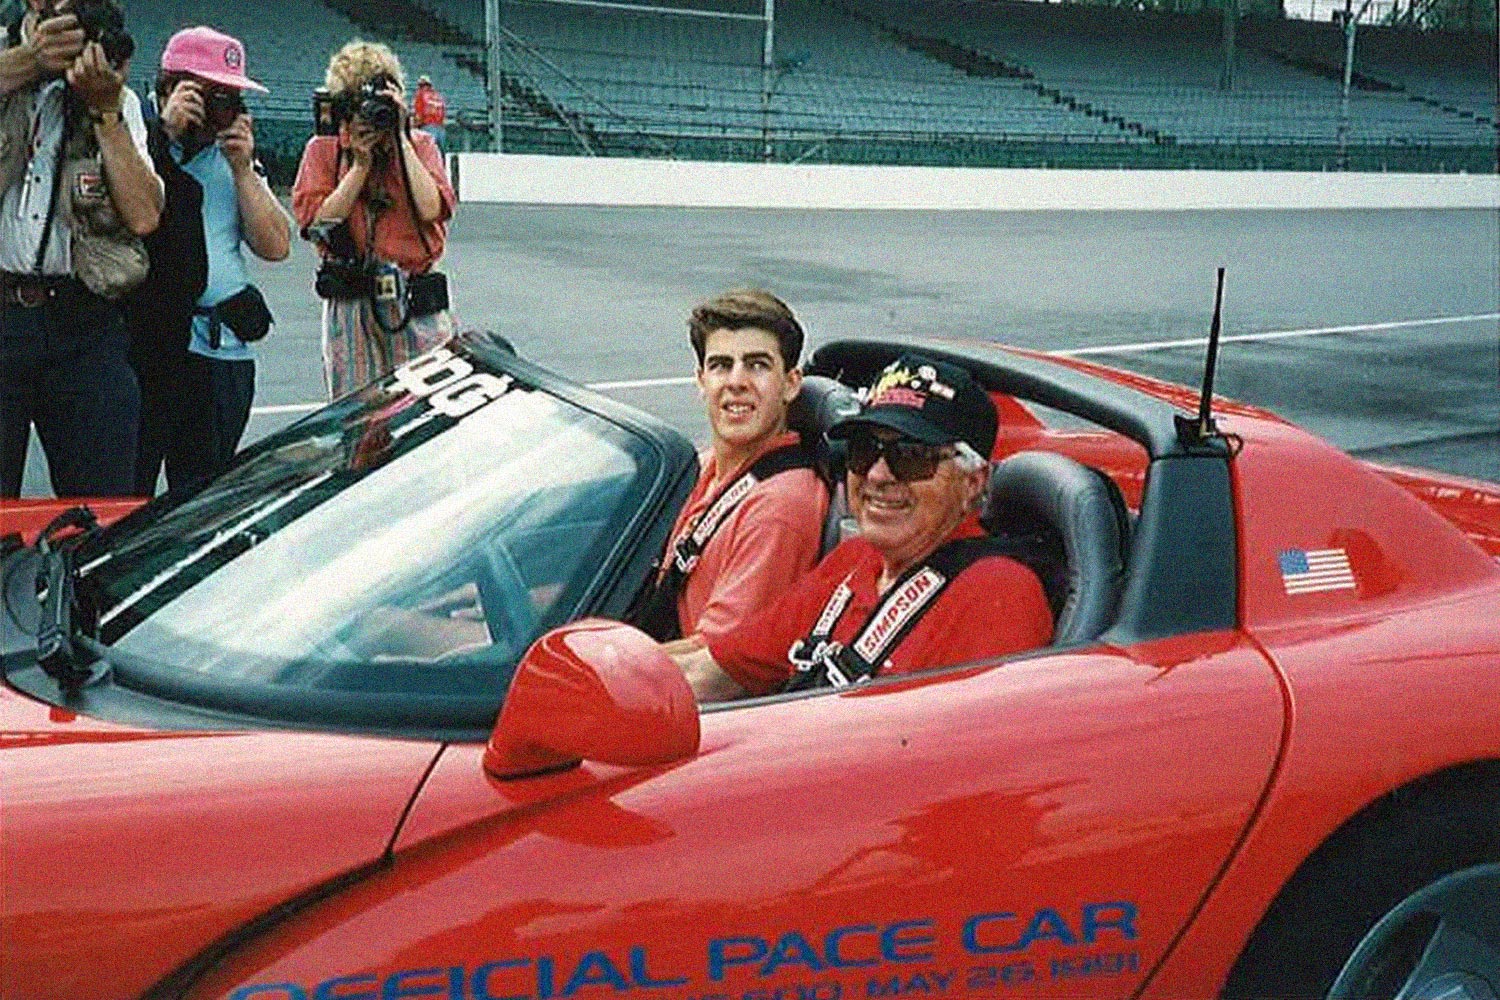 Carroll Shelby in the pace car at the Indy 500 in May 1991 with his grandson Aaron Shelby